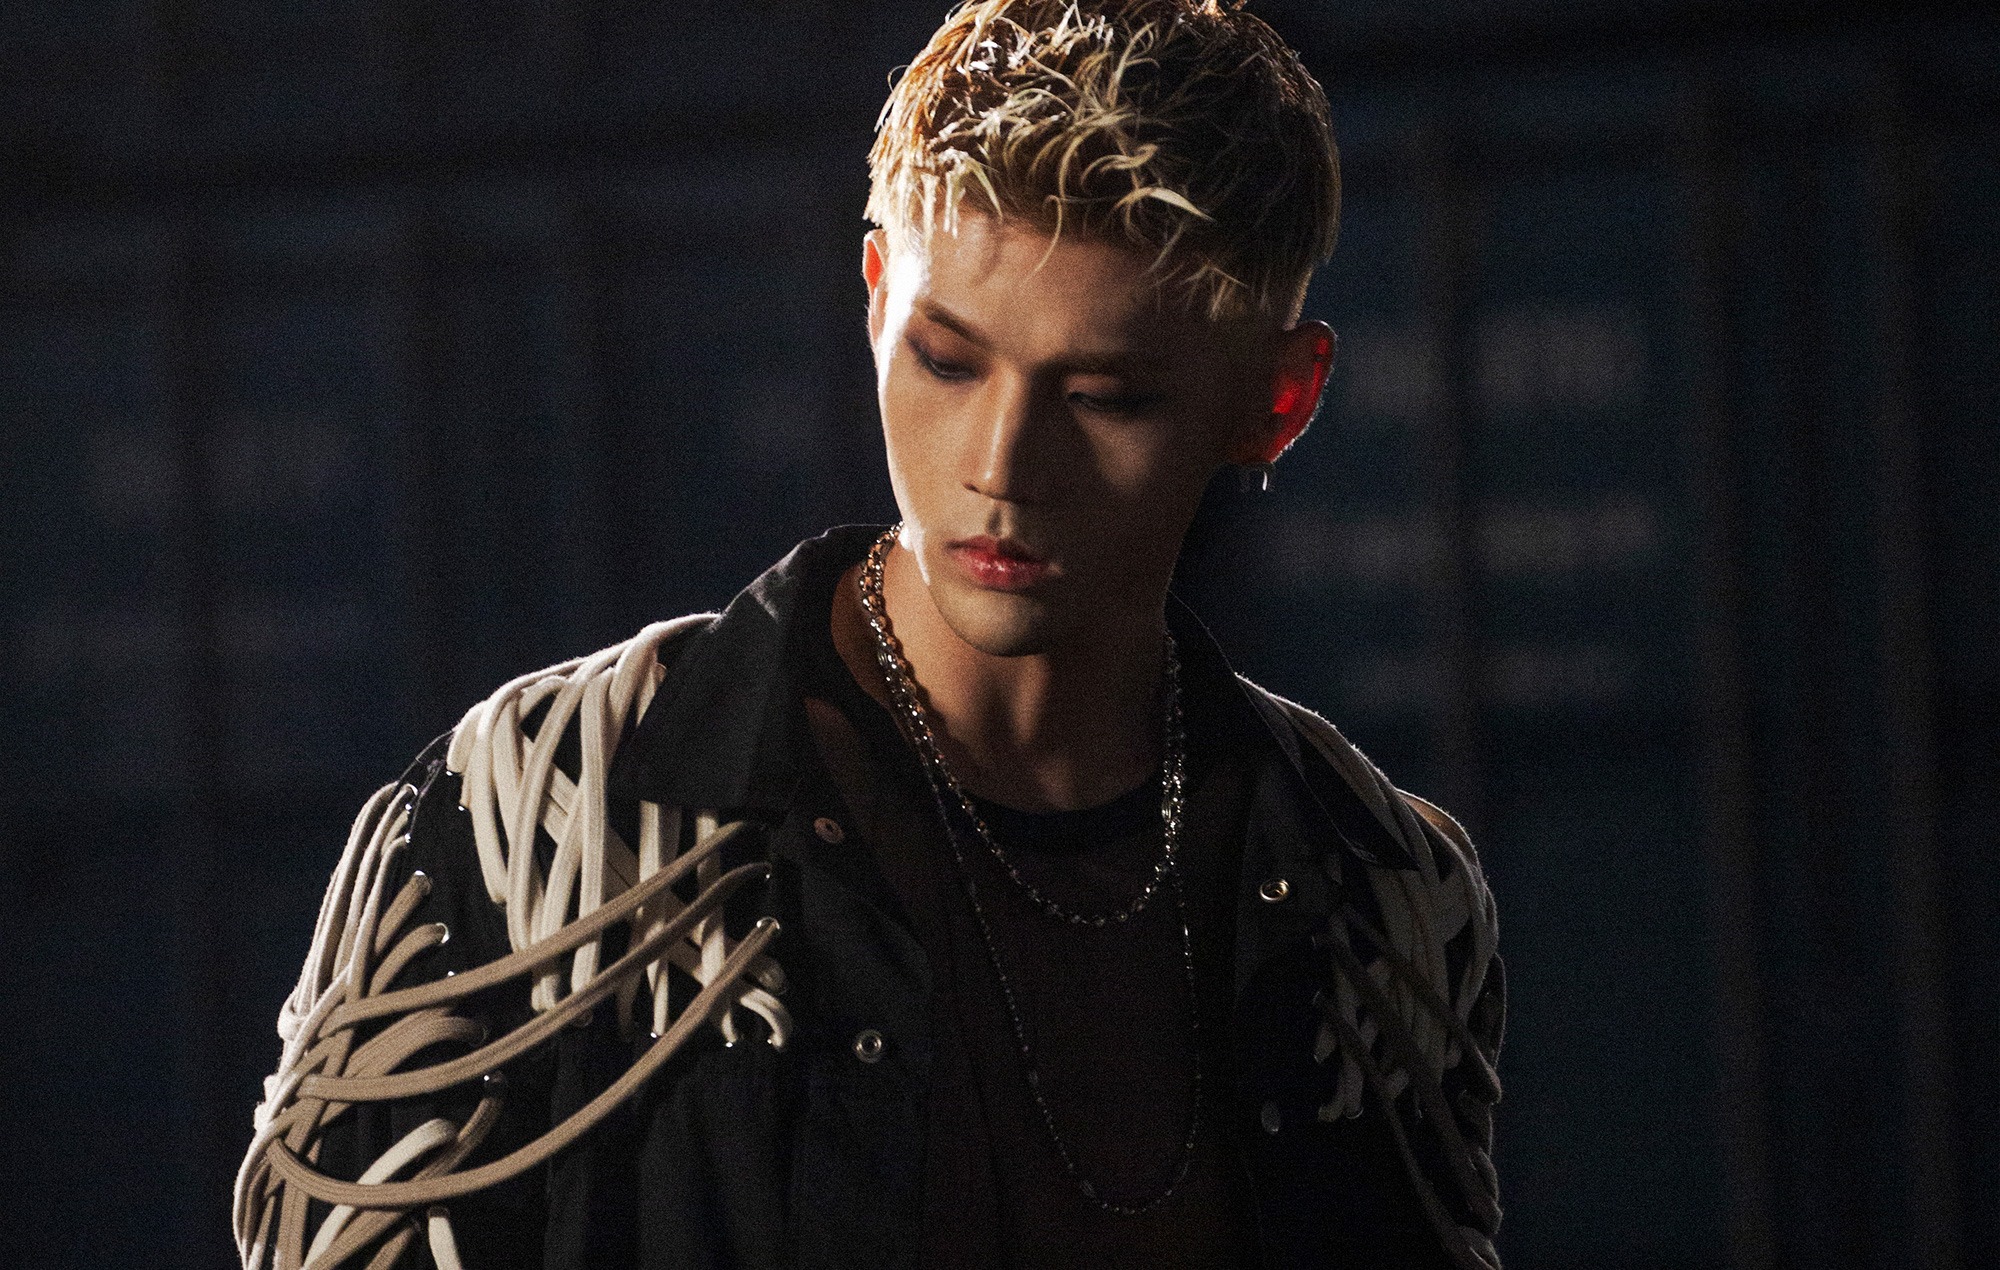 BM of KARD: “I love expressing attraction and letting someone know how beautiful they are”